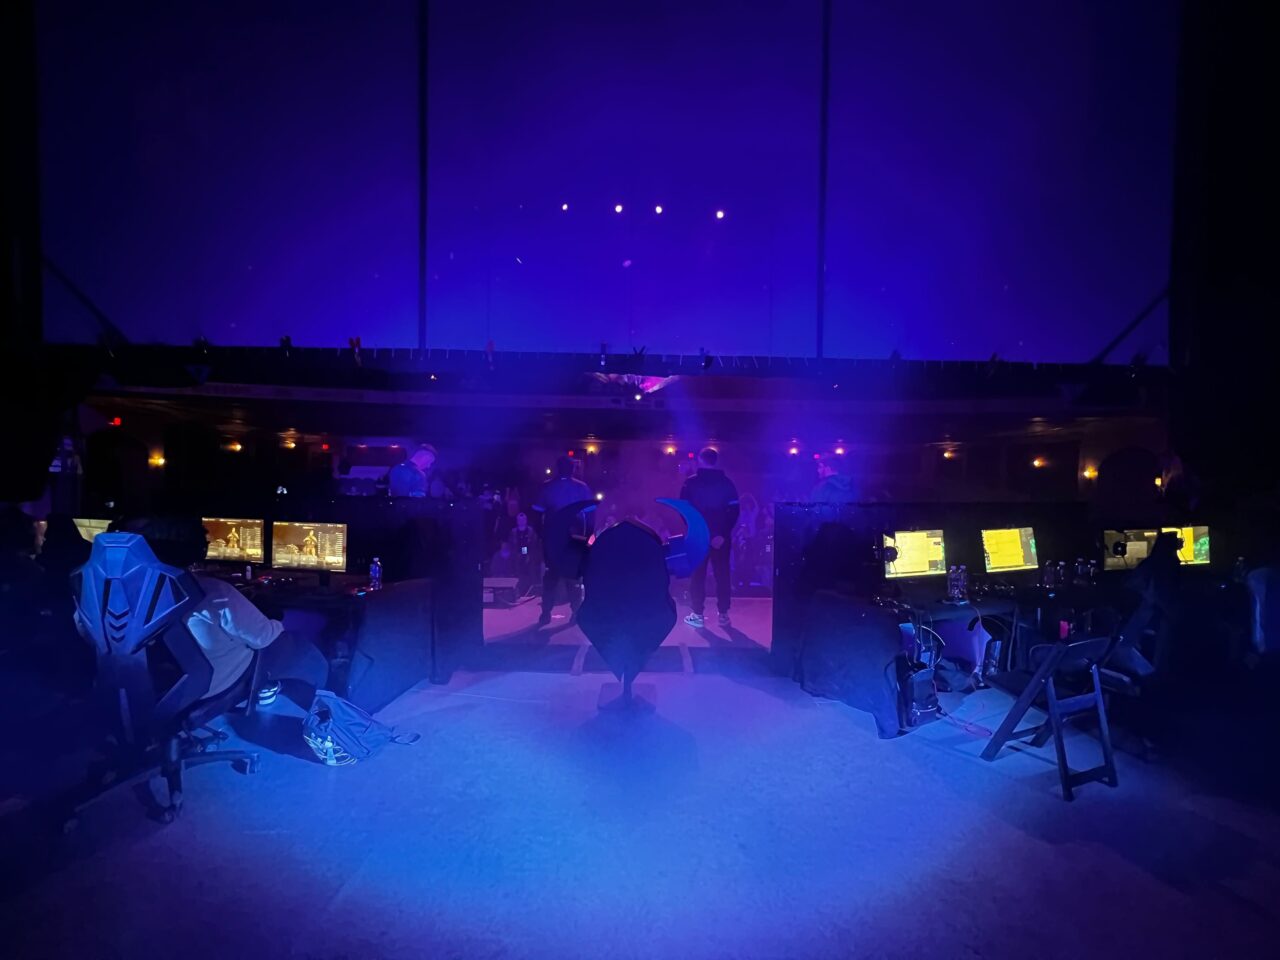 Minnesota Rokkr's stage at the Madison Home Series during Call of Duty League Major IV Qualifiers.